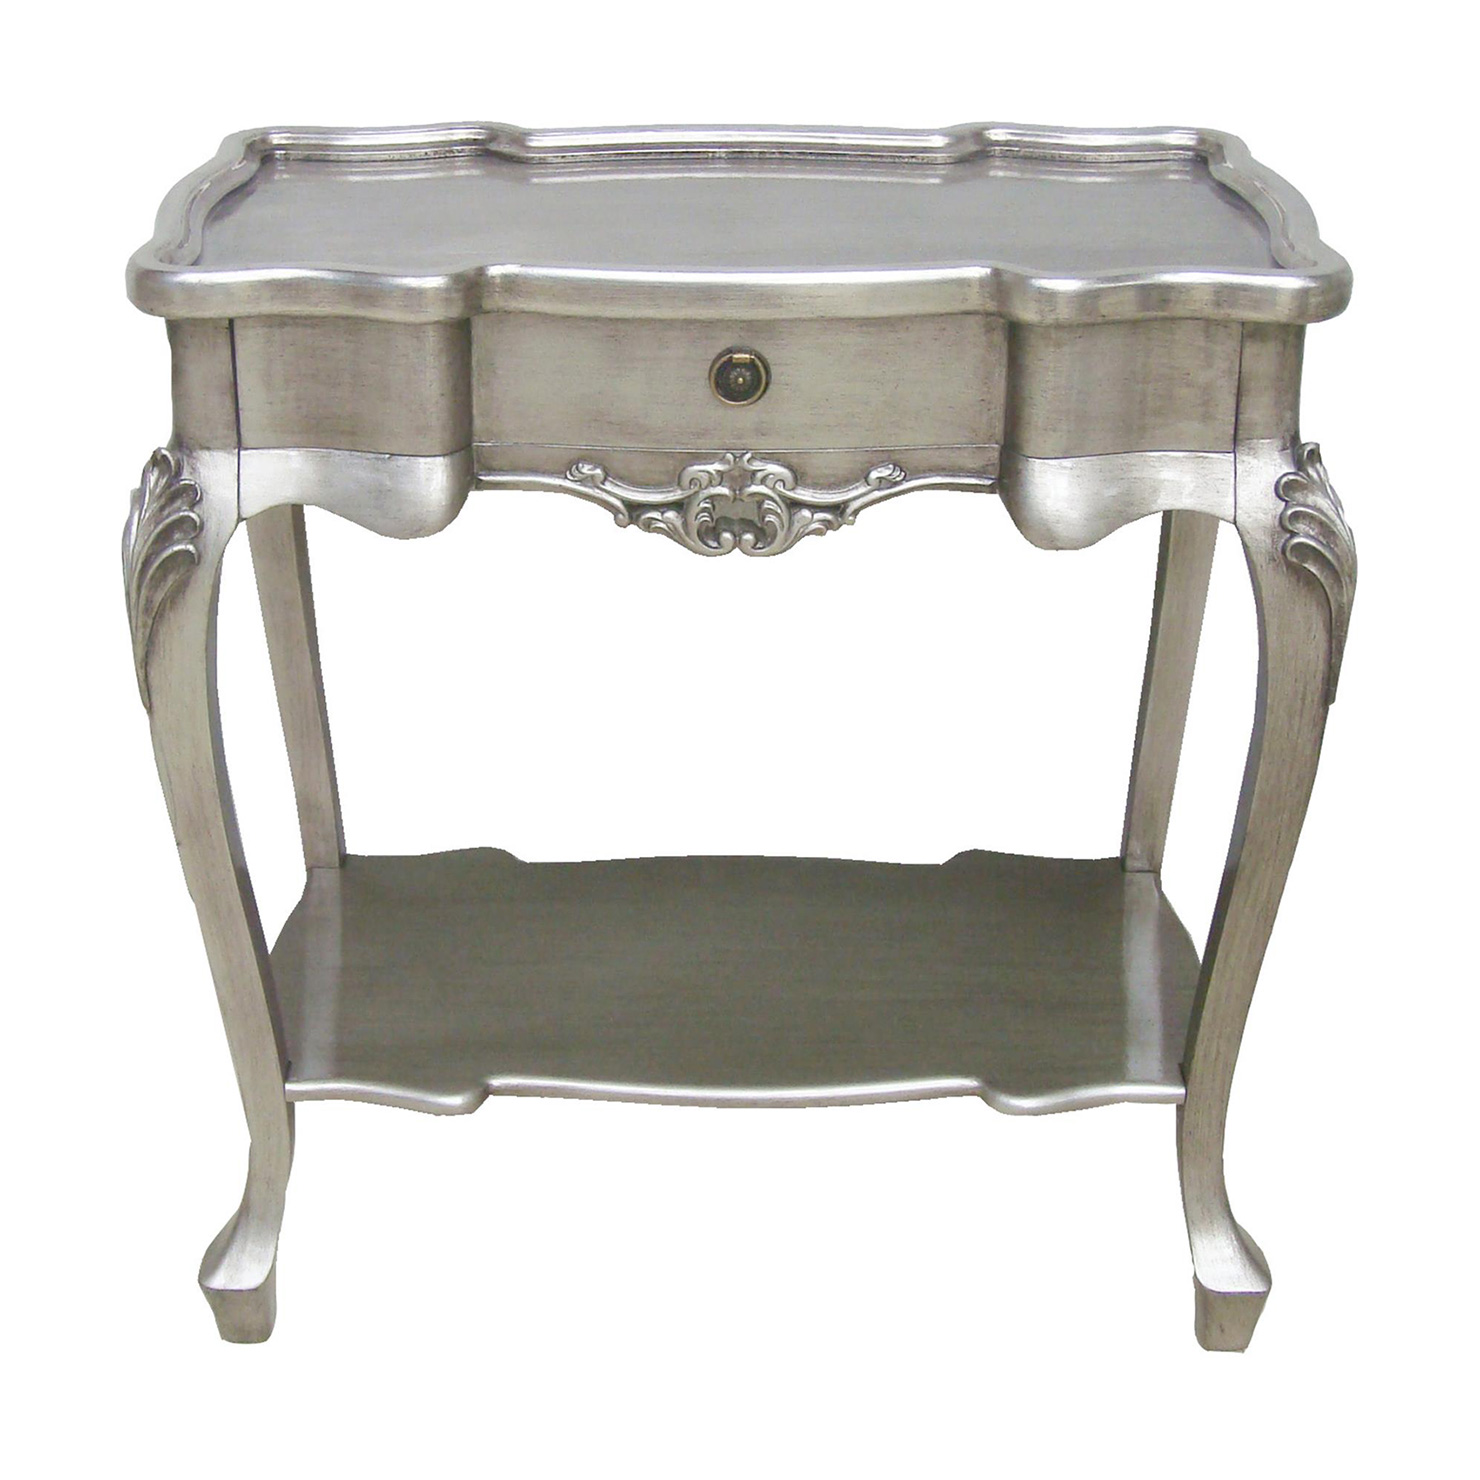 nice silver accent table with old and vintage style mirrored shelves painted metal extra long curtains nate berkus coffee wooden bedside lamps red tablecloth floor separator